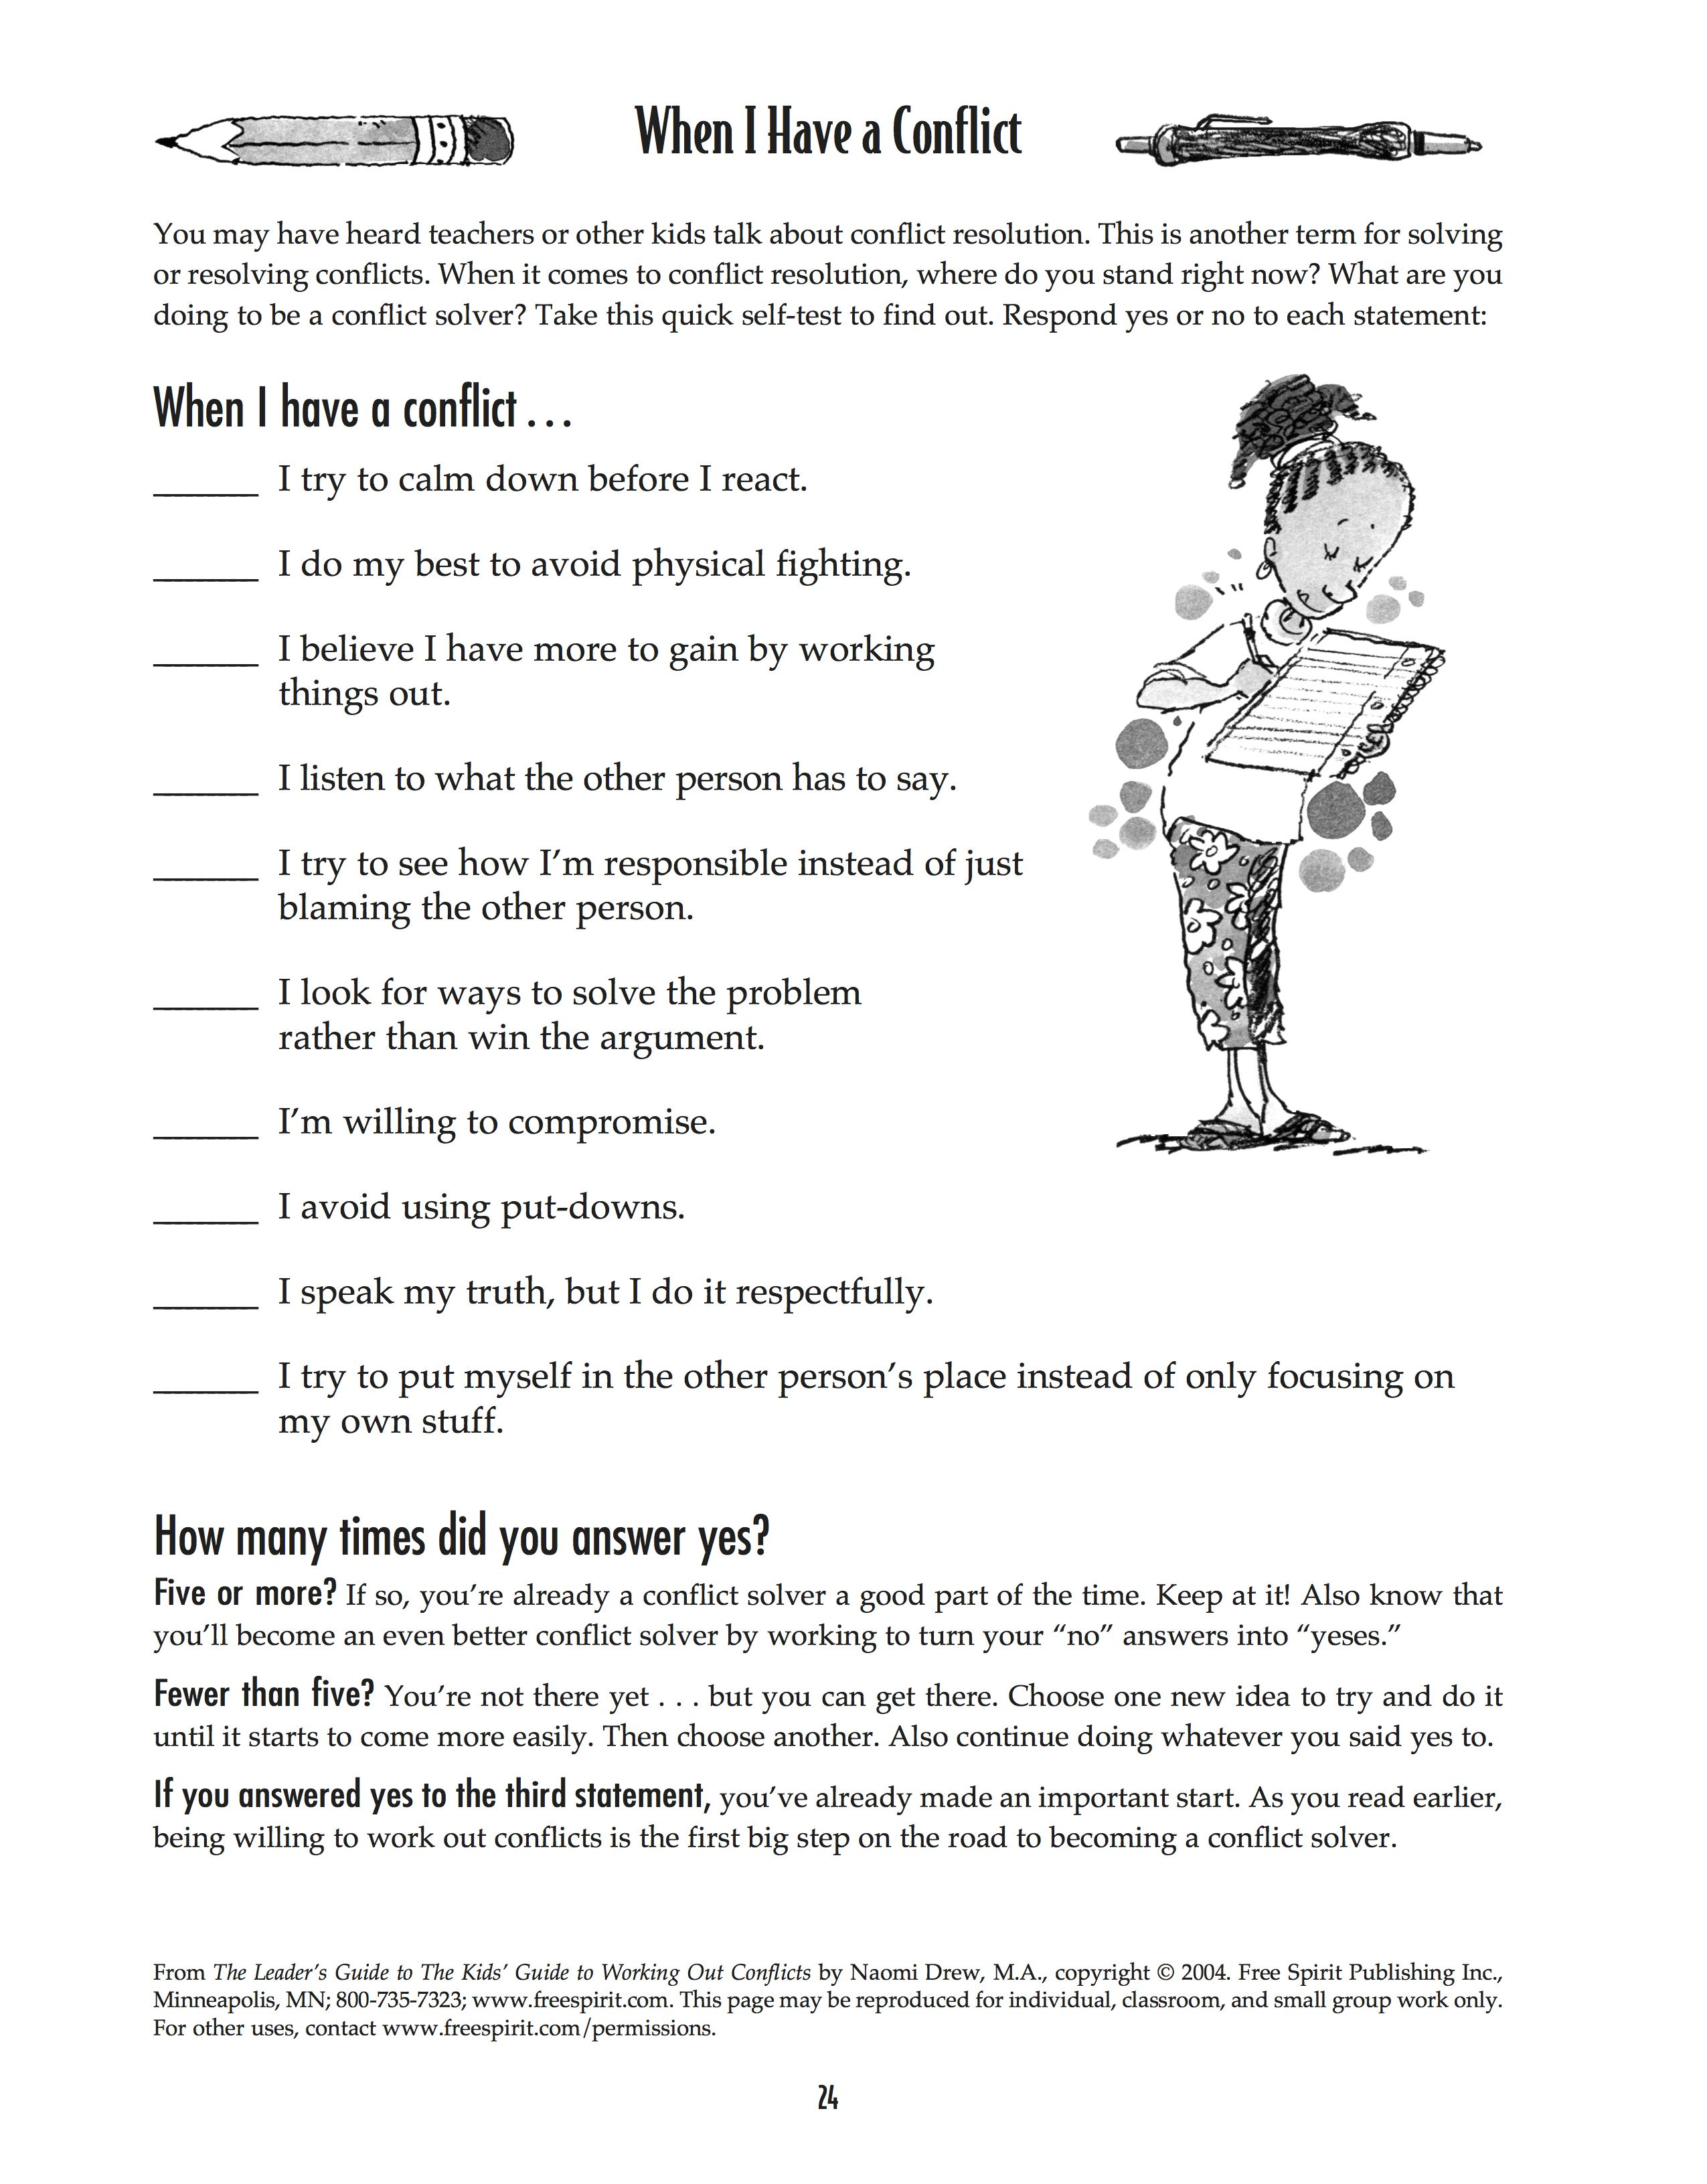 Free Printable Worksheet: When I Have A Conflict. A Quick Self-Test | Free Printable Self Control Worksheets